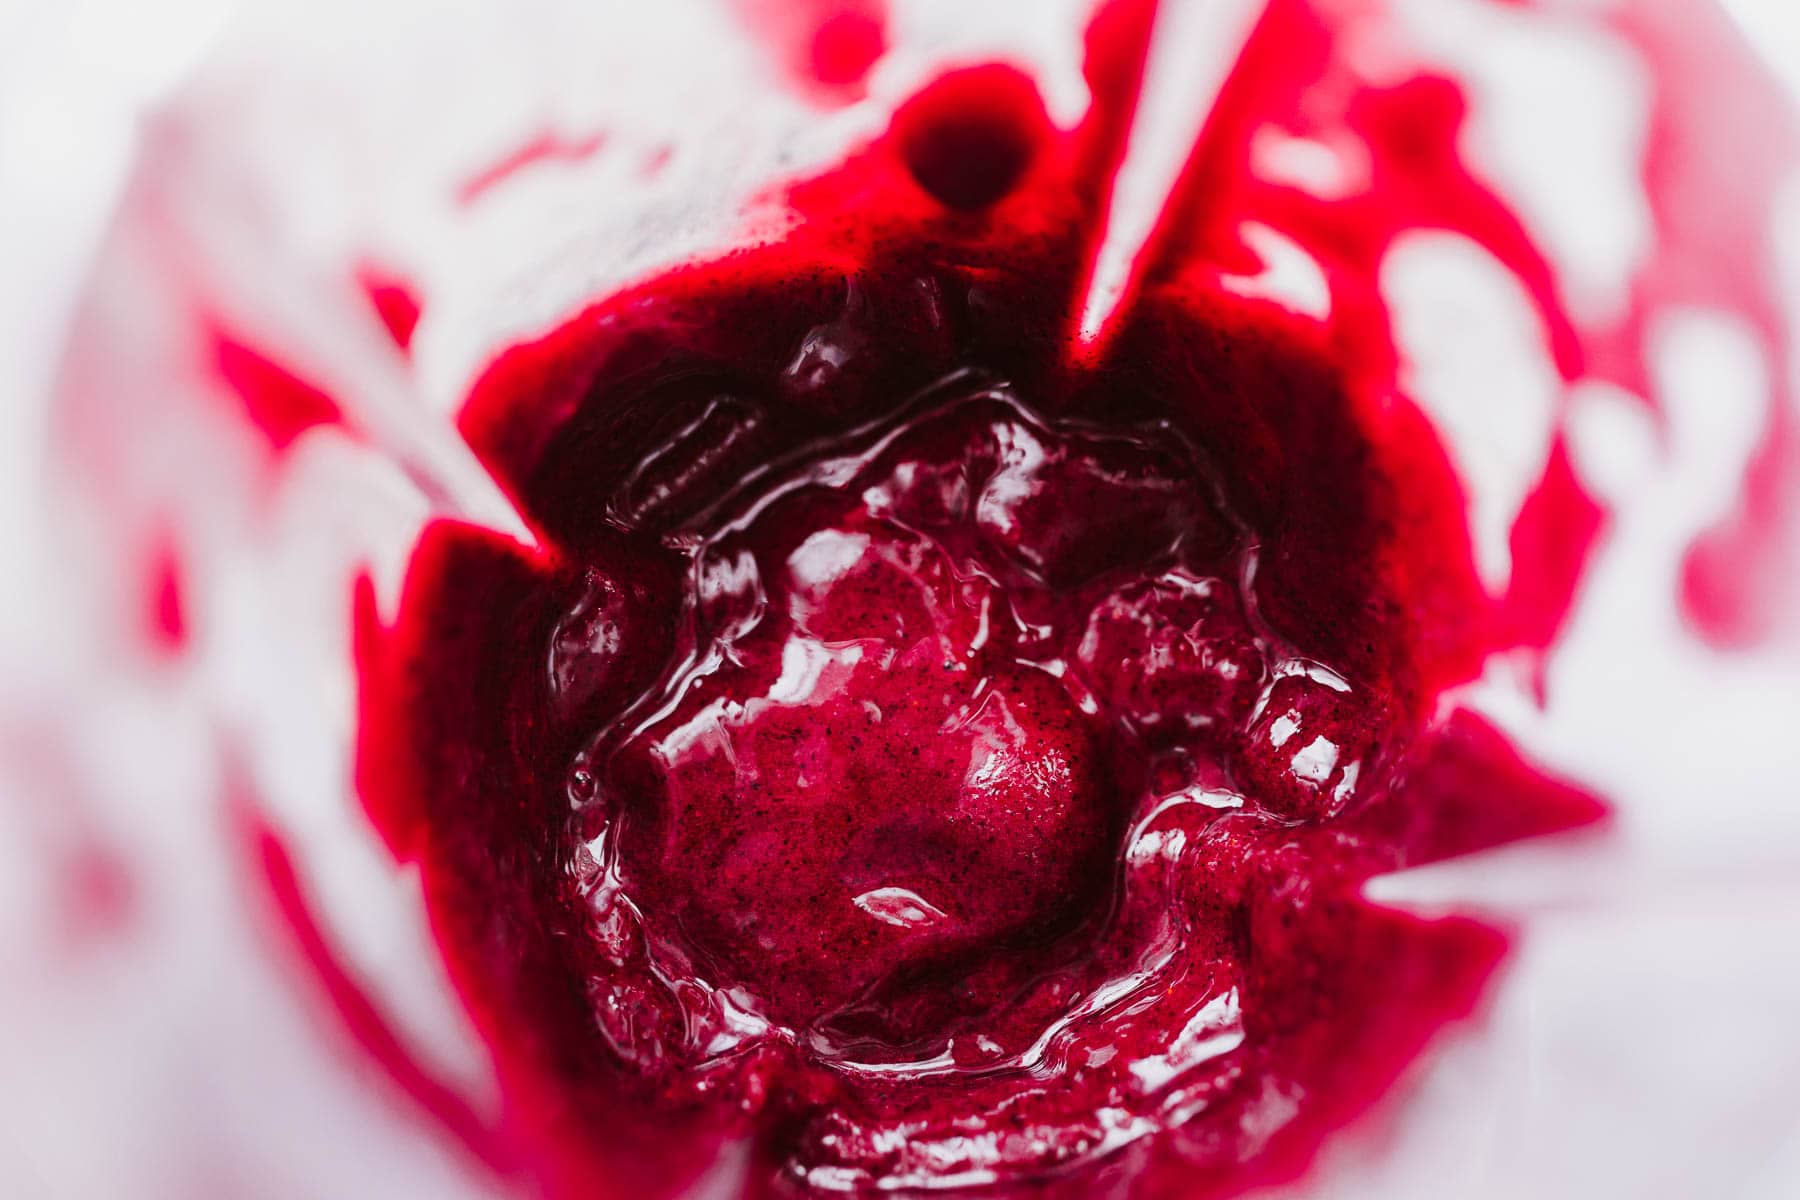 Top view of a blender container filled with a freshly blended virgin blueberry margarita.